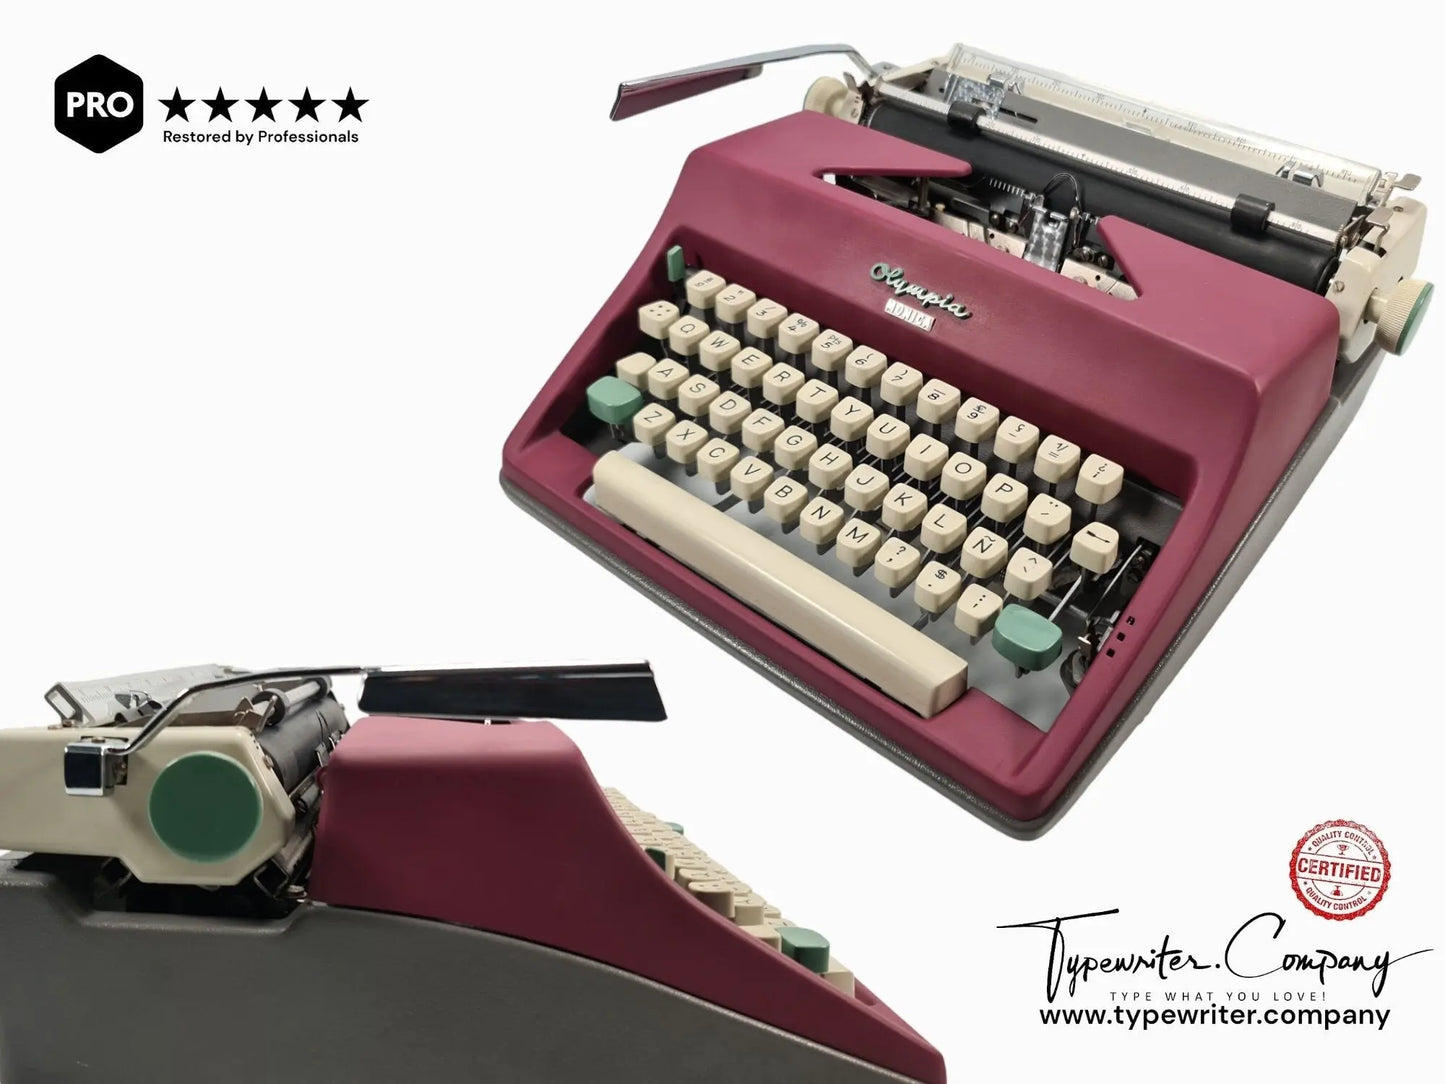 Olympia SM8 Violet Plum Typewriter, Vintage, Mint Condition, Manual Portable, Professionally Serviced by Typewriter.Company - ElGranero Typewriter.Company